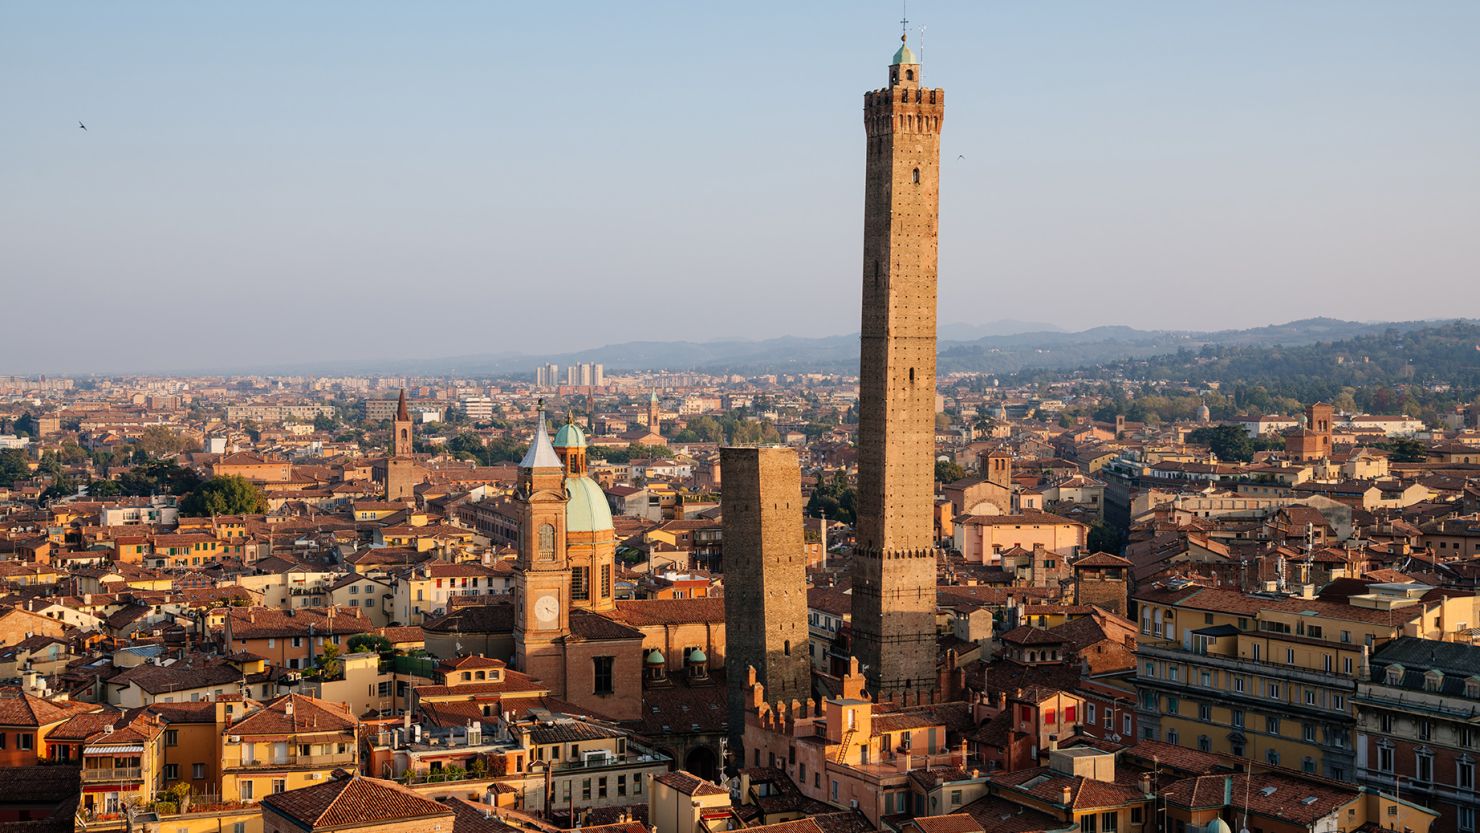 The 'leaning' Garisenda tower and its higher neighbor, the Asinelli sit in the heart of Bologna.